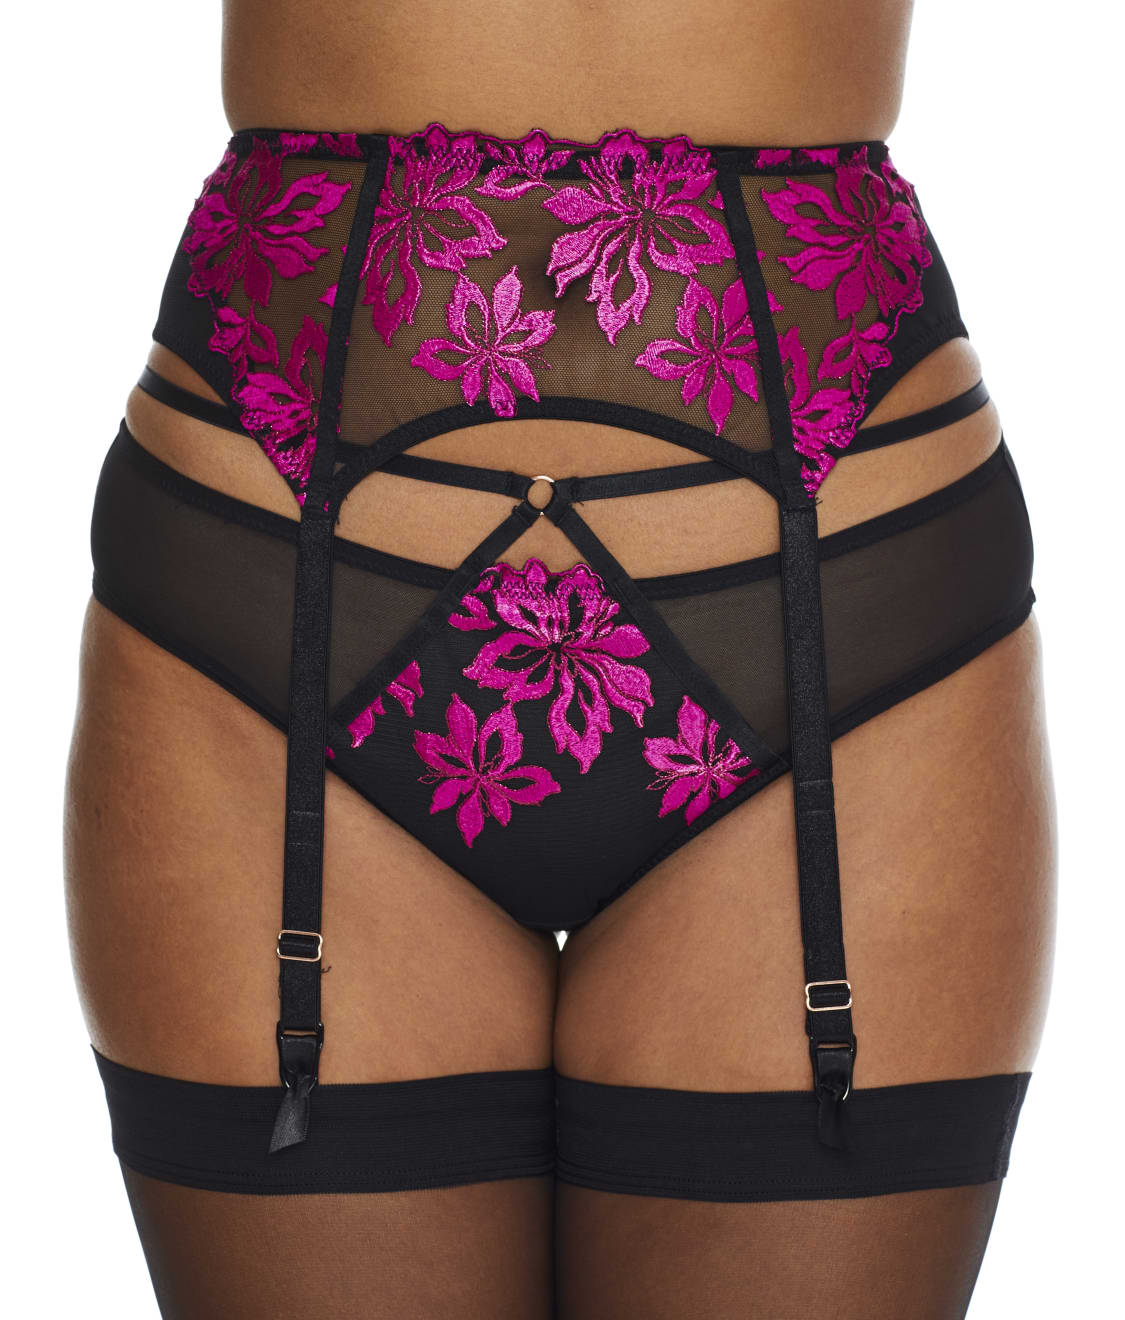 Pour Moi: Roxie Embroidered Garter Belt 22507